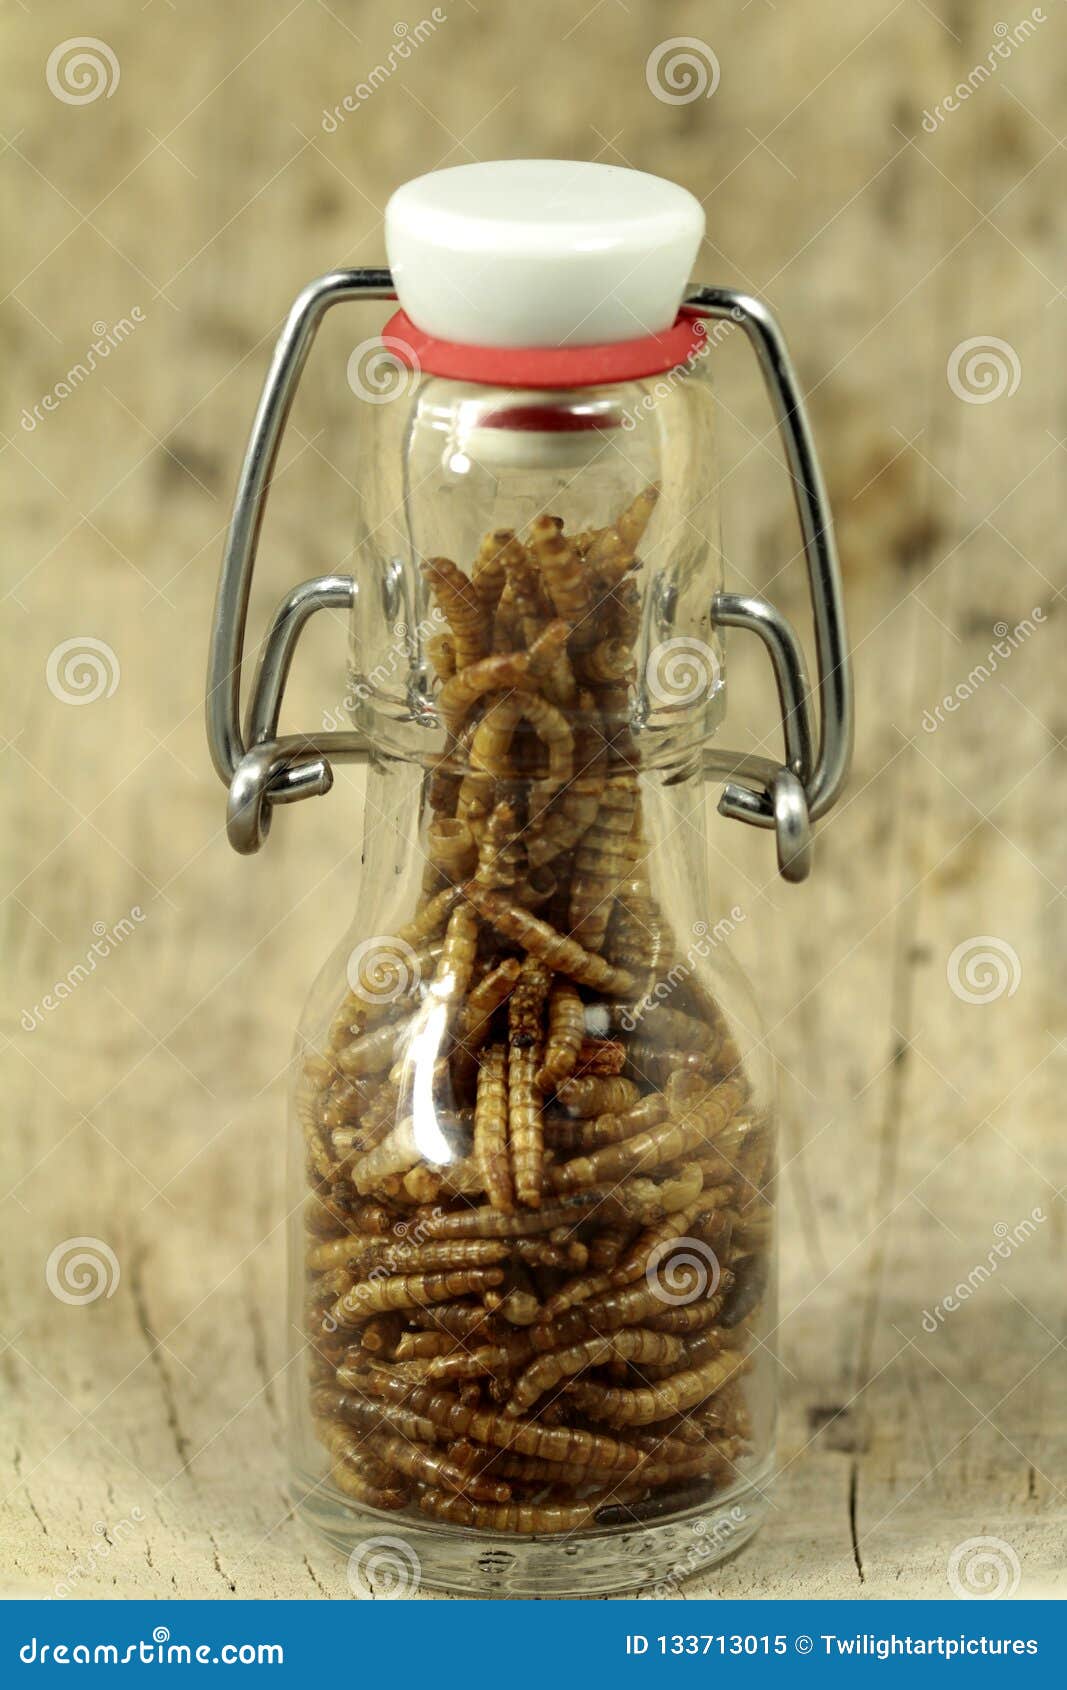 mealworms, pur proteine in the bottle